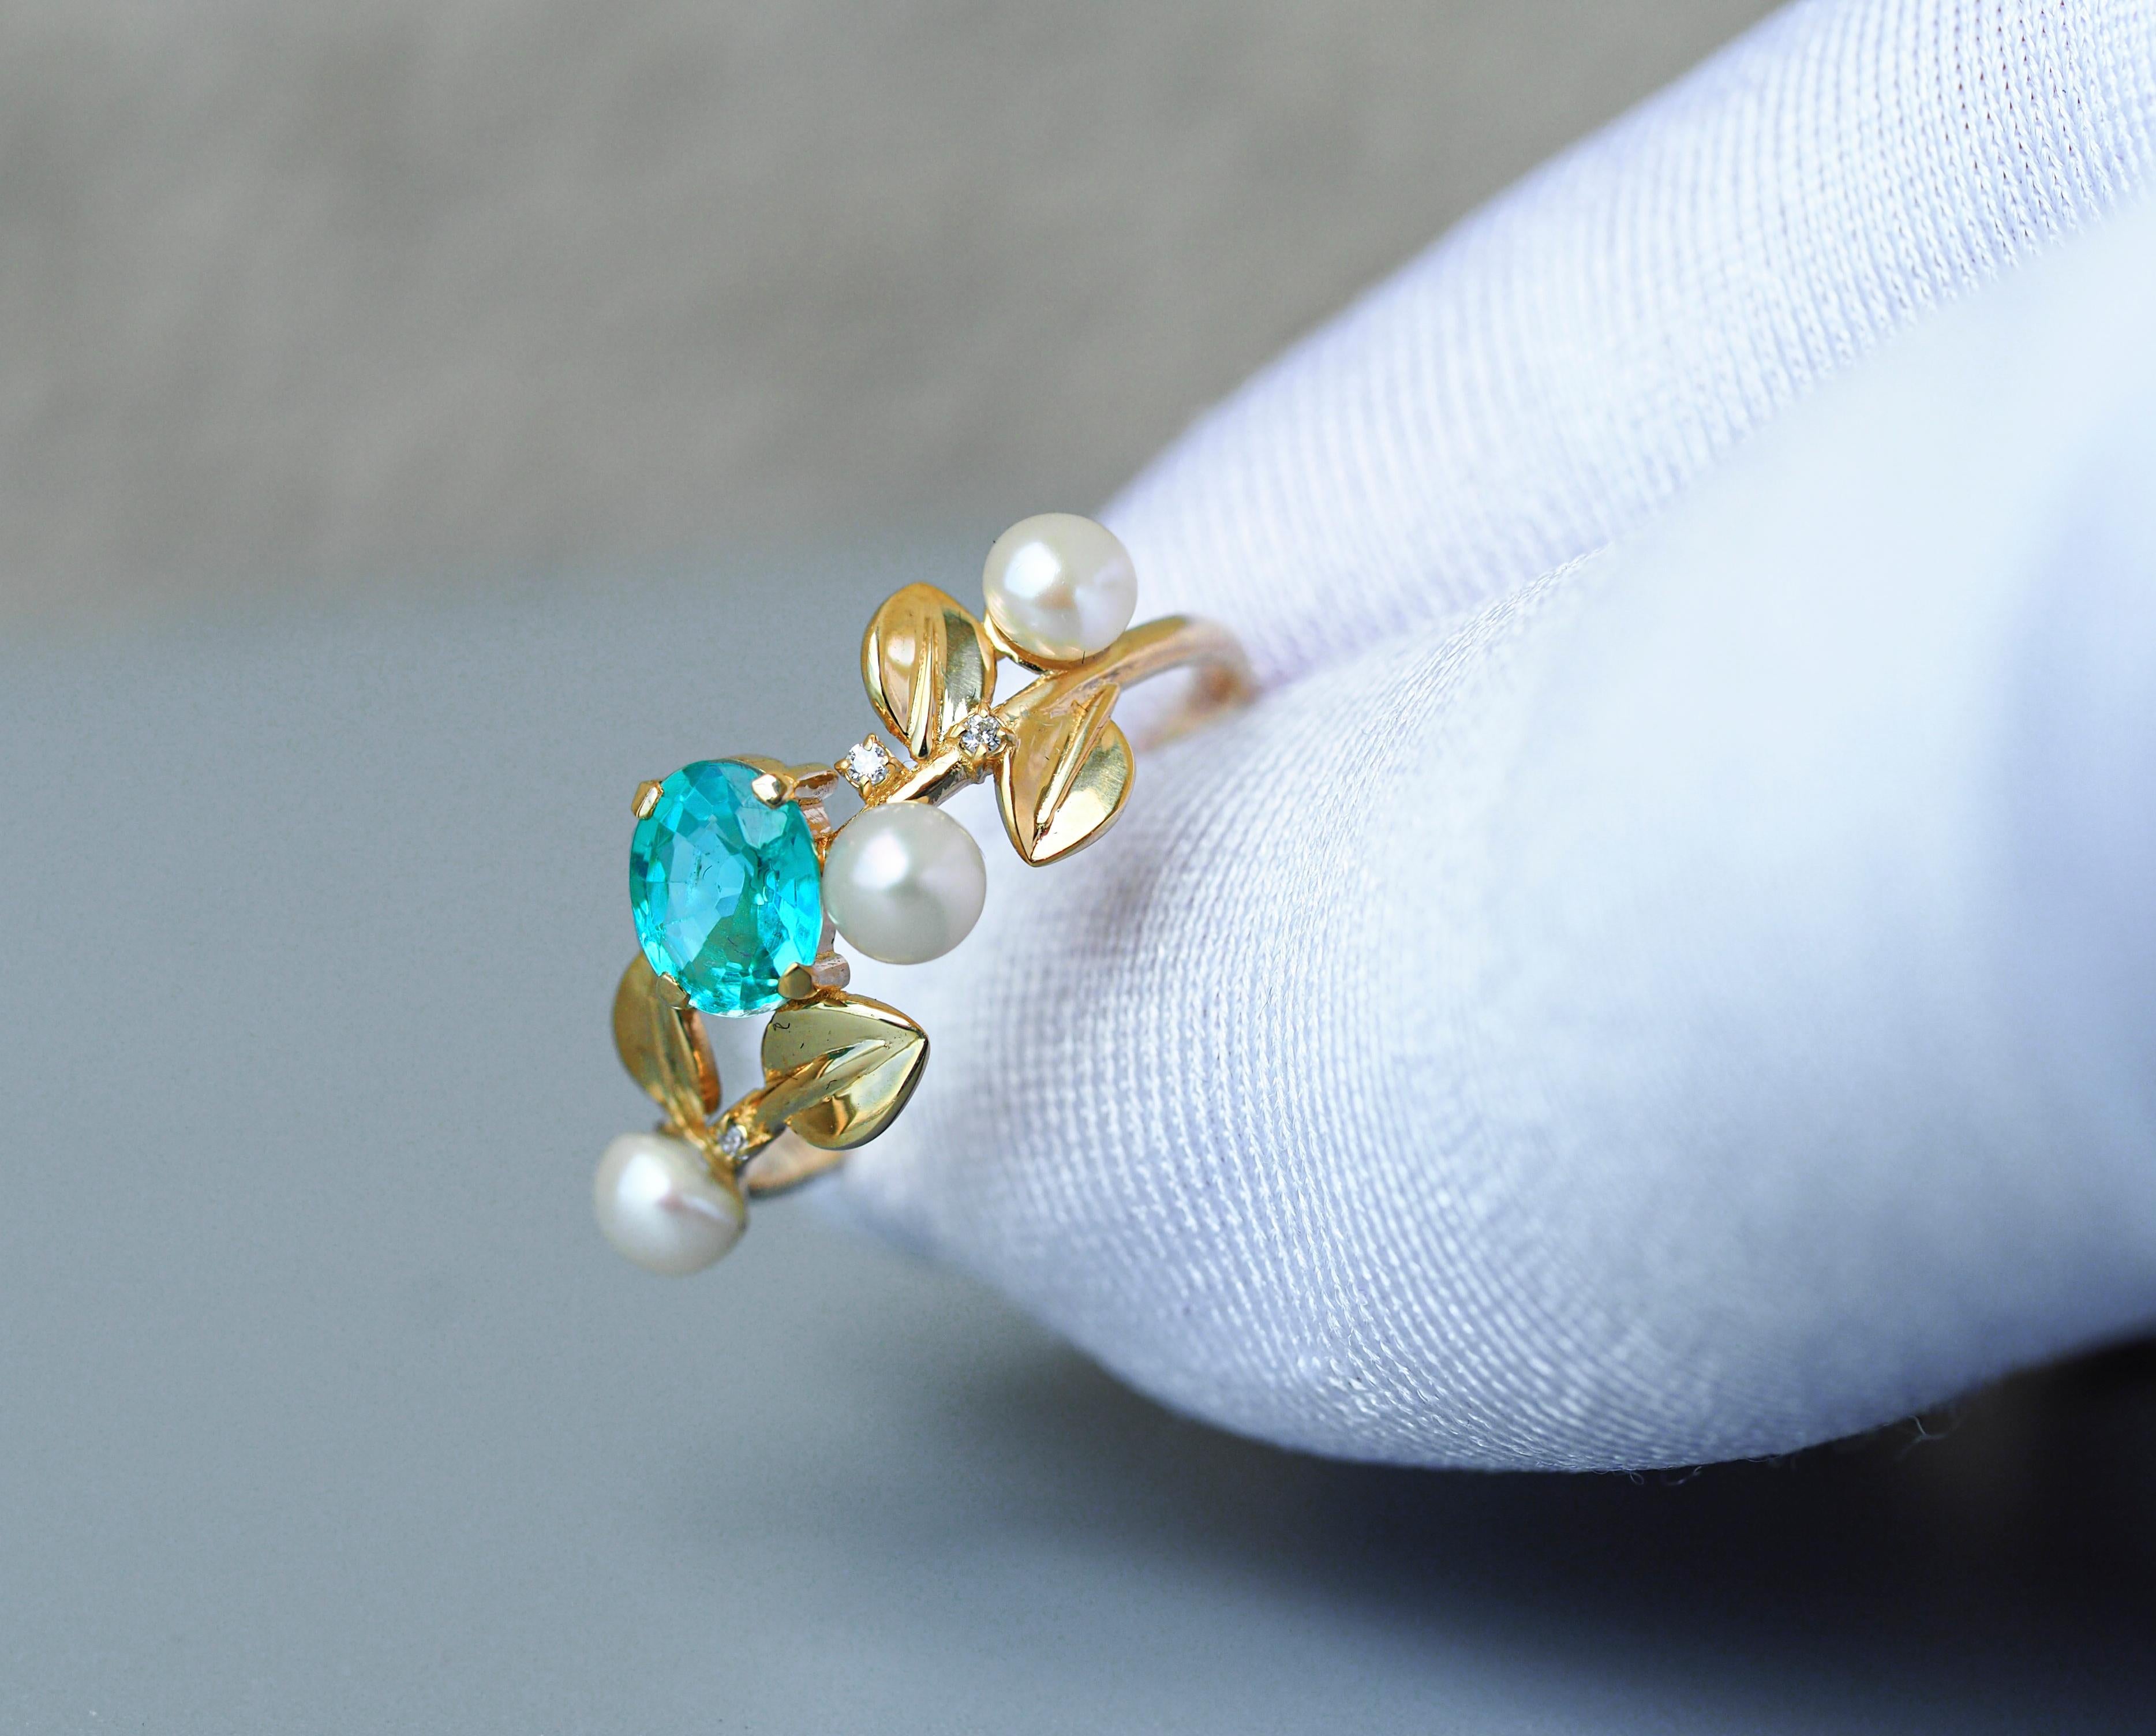 For Sale:  14k Gold Floral Ring with Oval Apatite, Diamonds and Pearls 8